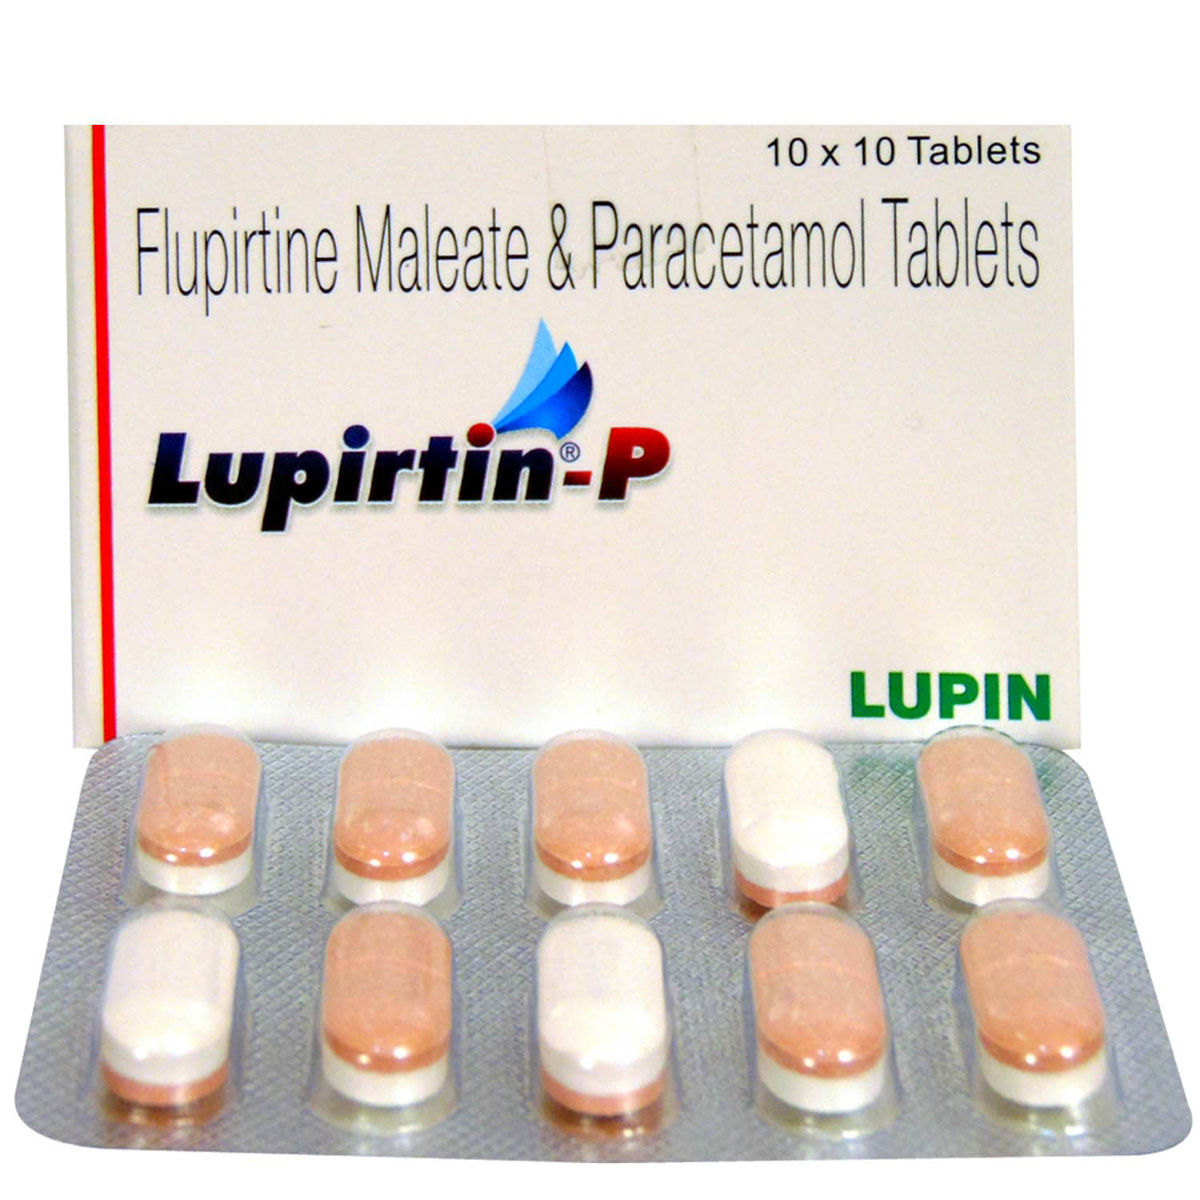 Lupirtin-P Tablet 10's, Pack of 10 TABLETS